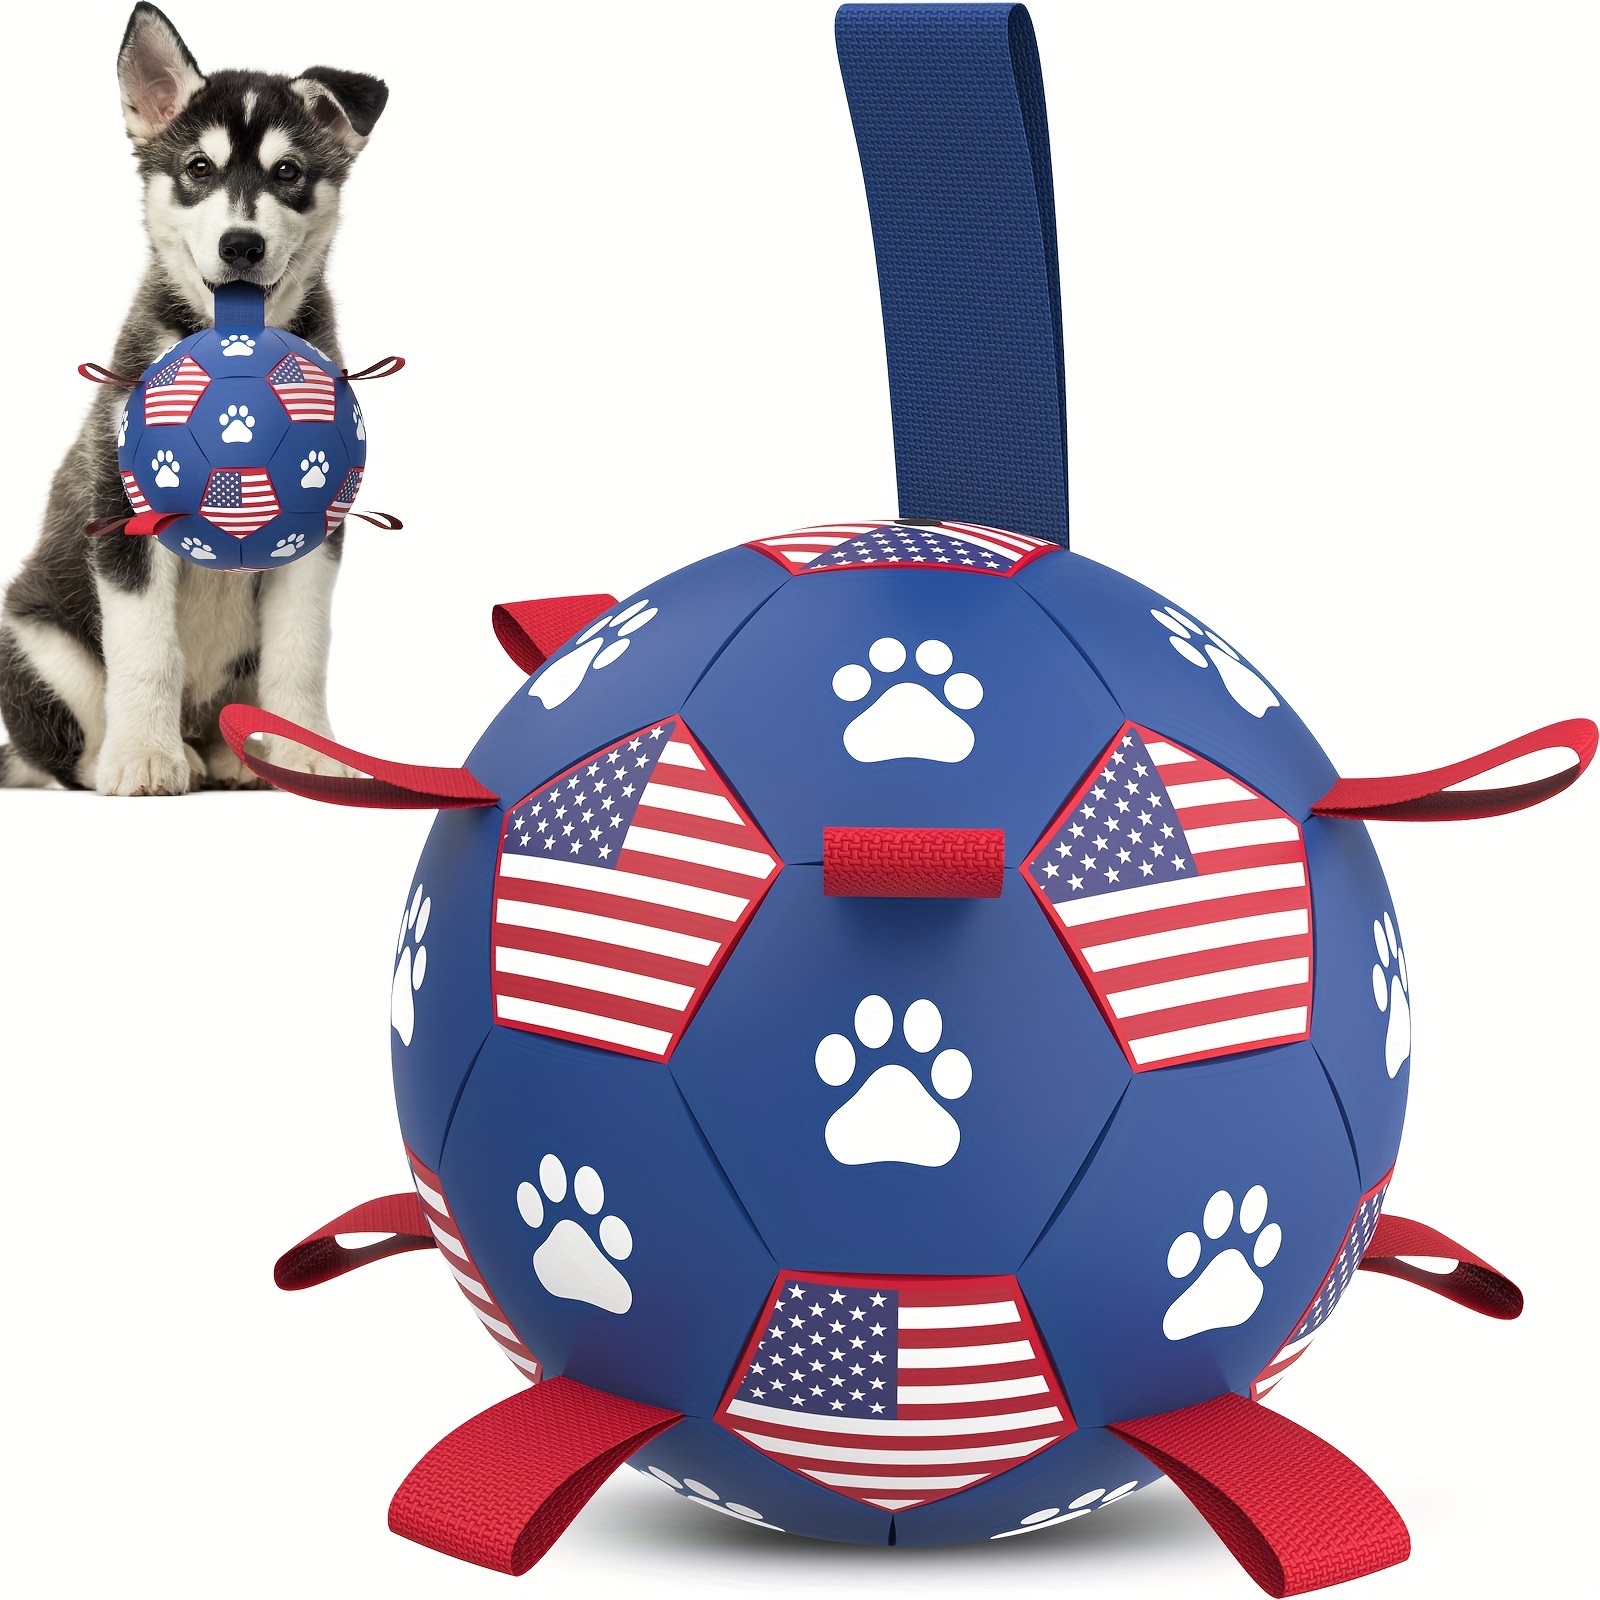 

1pc Dog Toys Soccer Ball With Straps, Interactive Dog Toys For Tug Of War, Dog Water Toy, Flag Pattern Dog Balls For Small Medium & Large Dogs